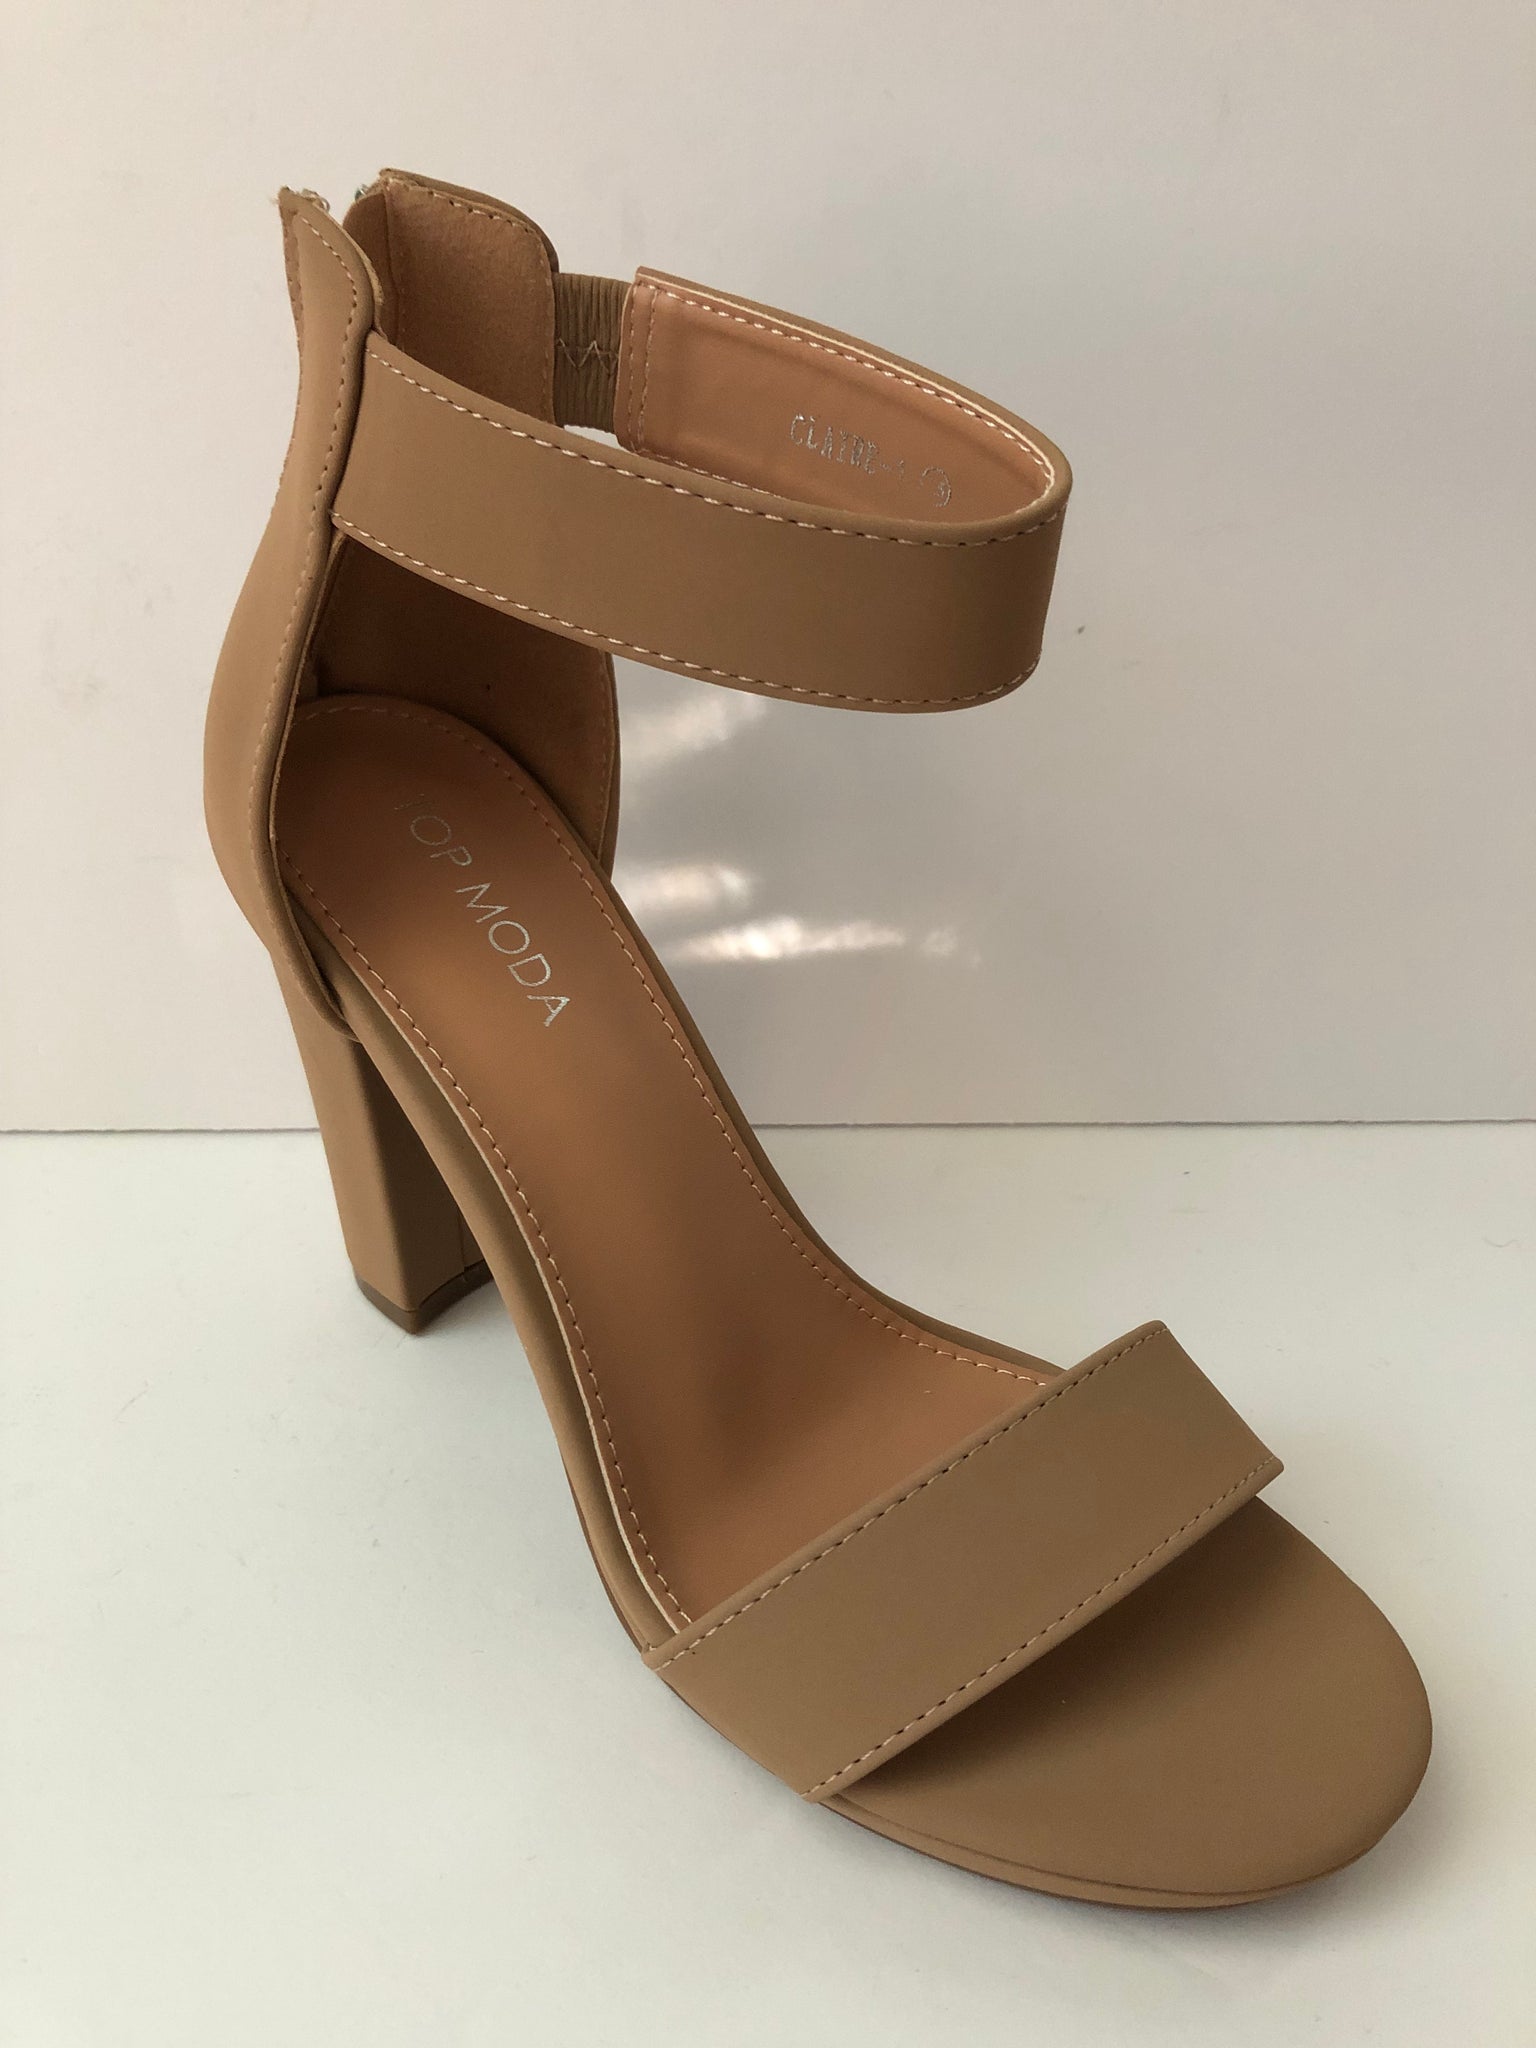 Women's Camel Color High Heels With Buckle Ankle Strap Sandals | SHEIN USA